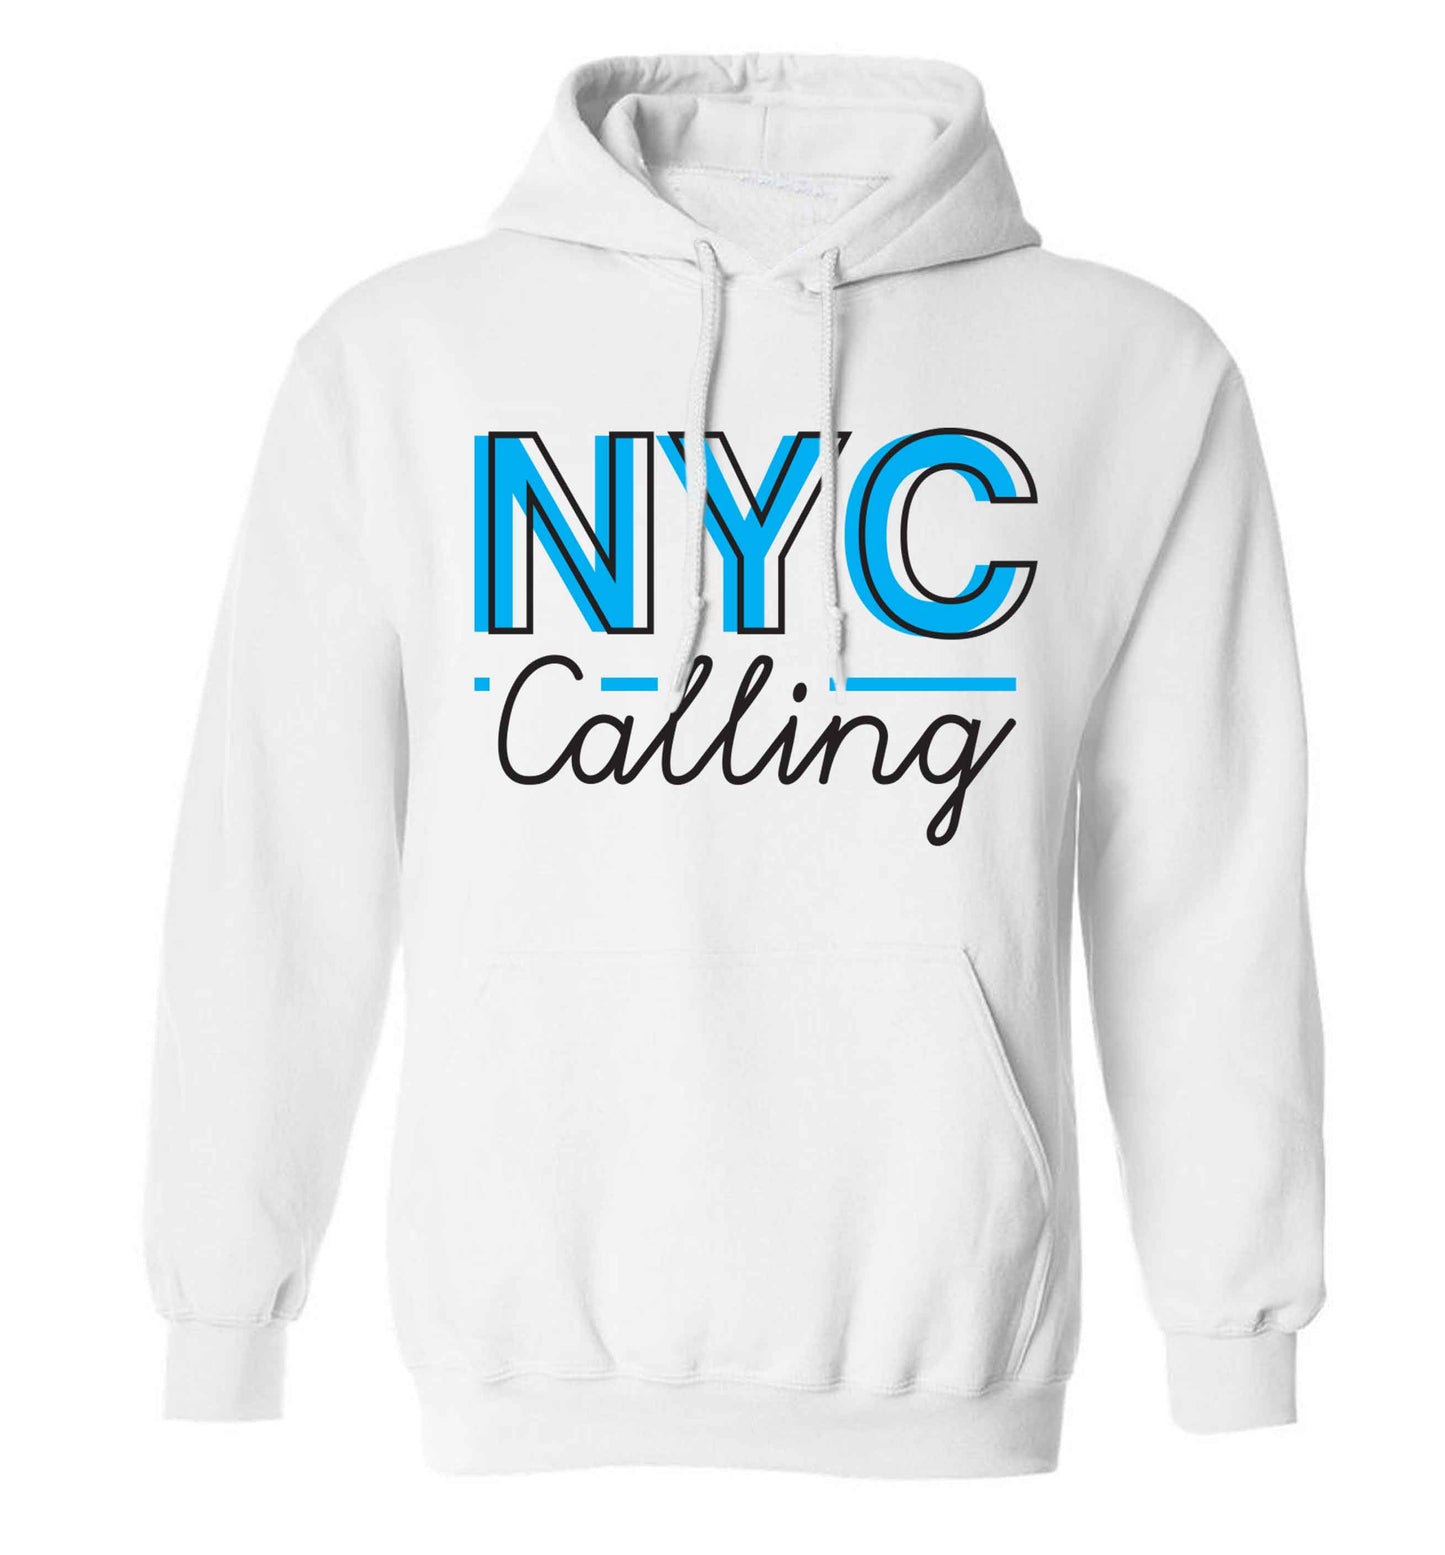 NYC calling adults unisex white hoodie 2XL